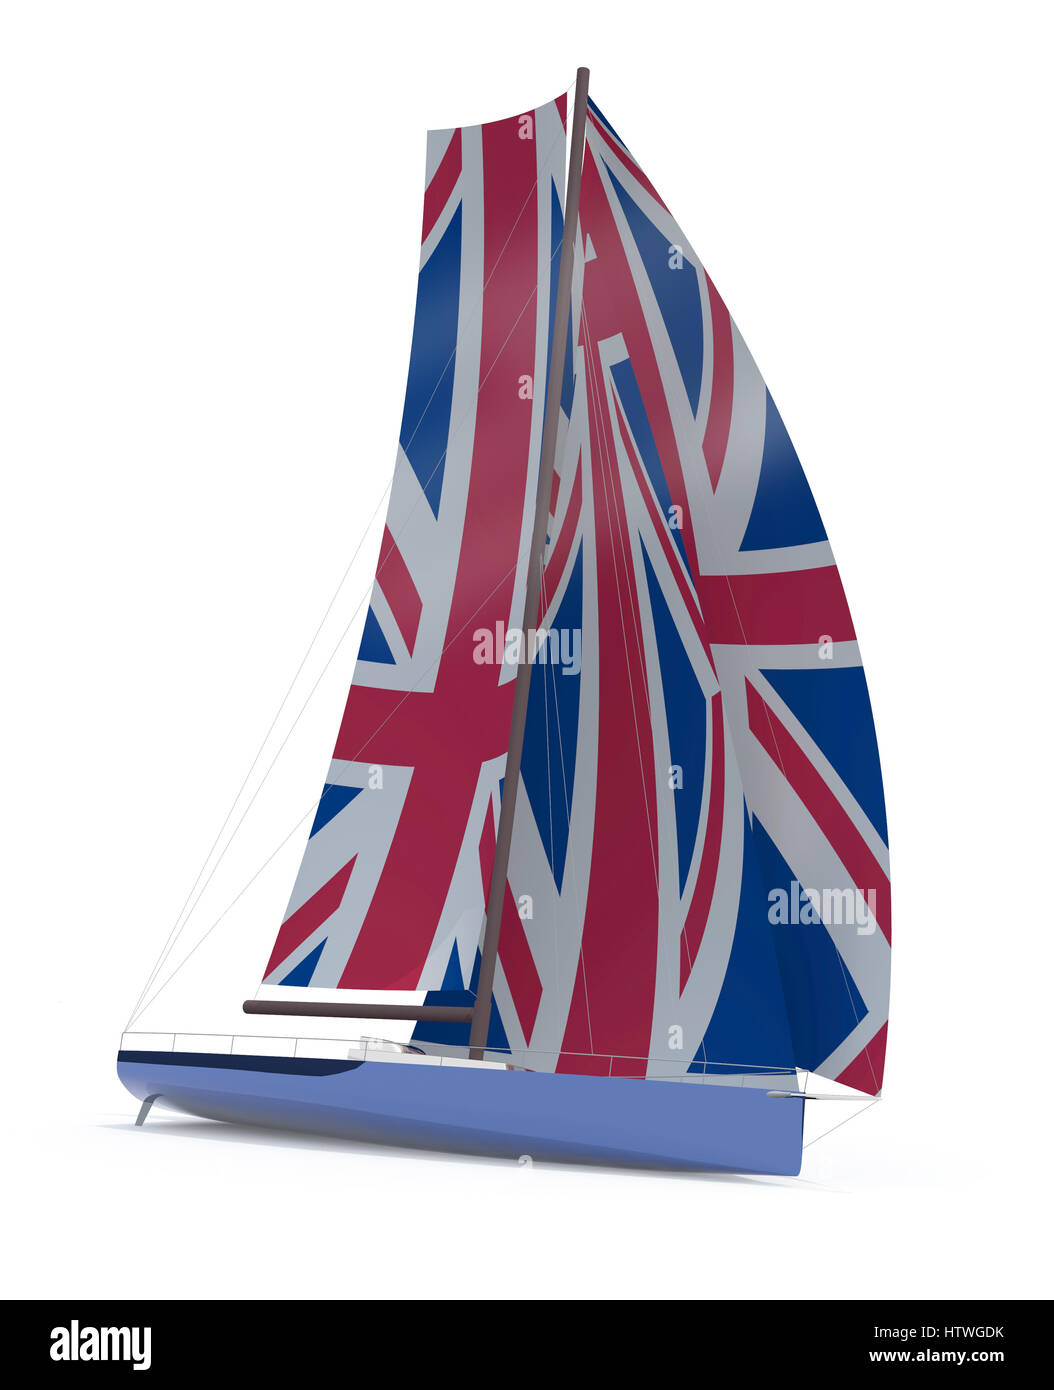 sailboat with sail colored as UK flag, 3d illustration Stock Photo